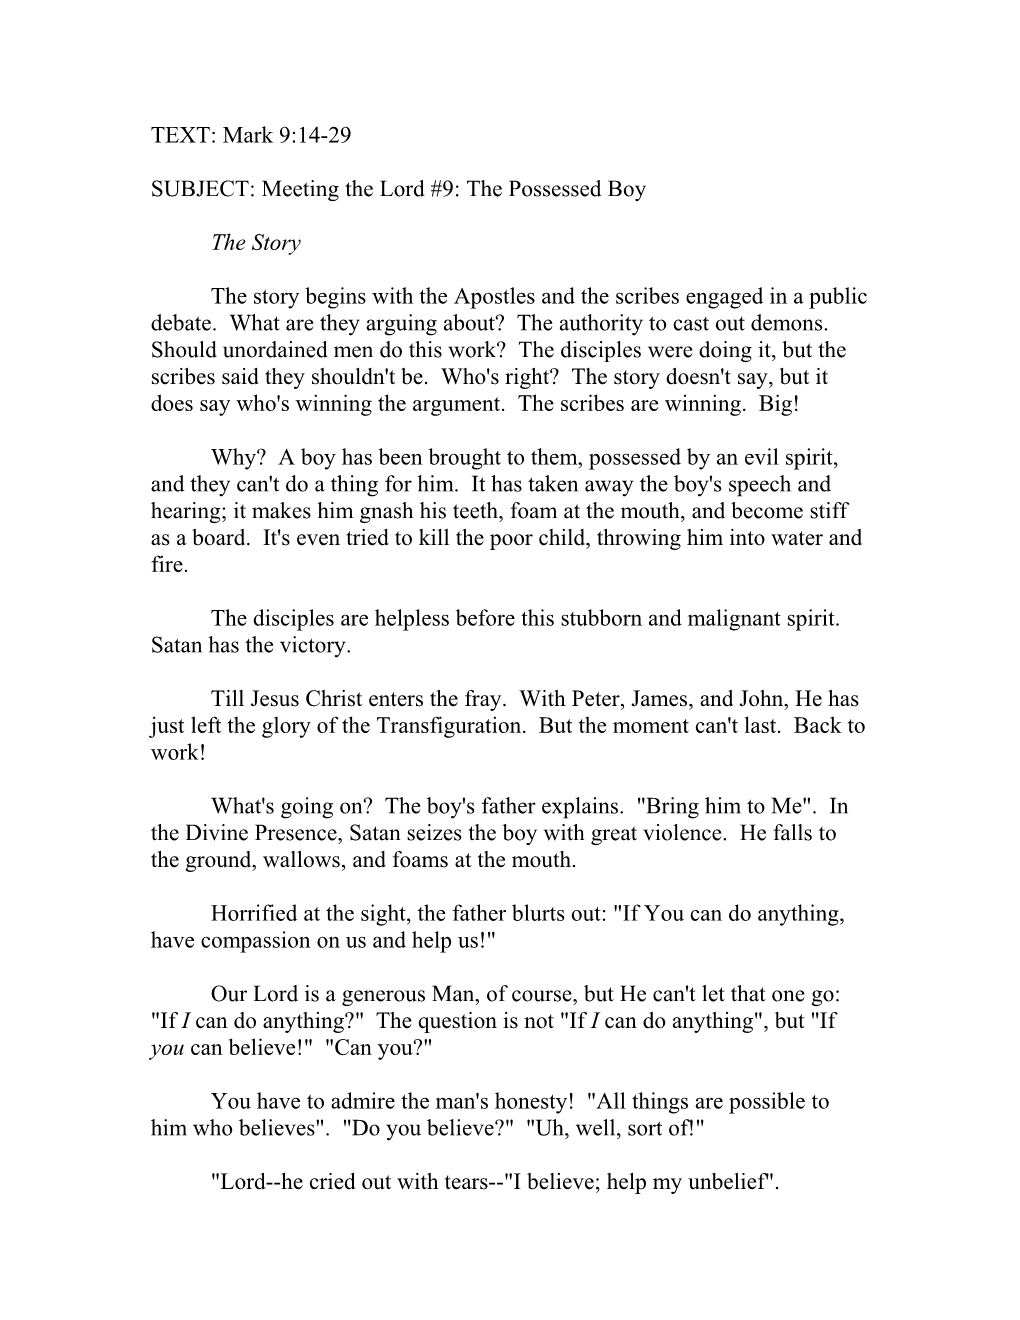 SUBJECT: Meeting the Lord #9: the Possessed Boy